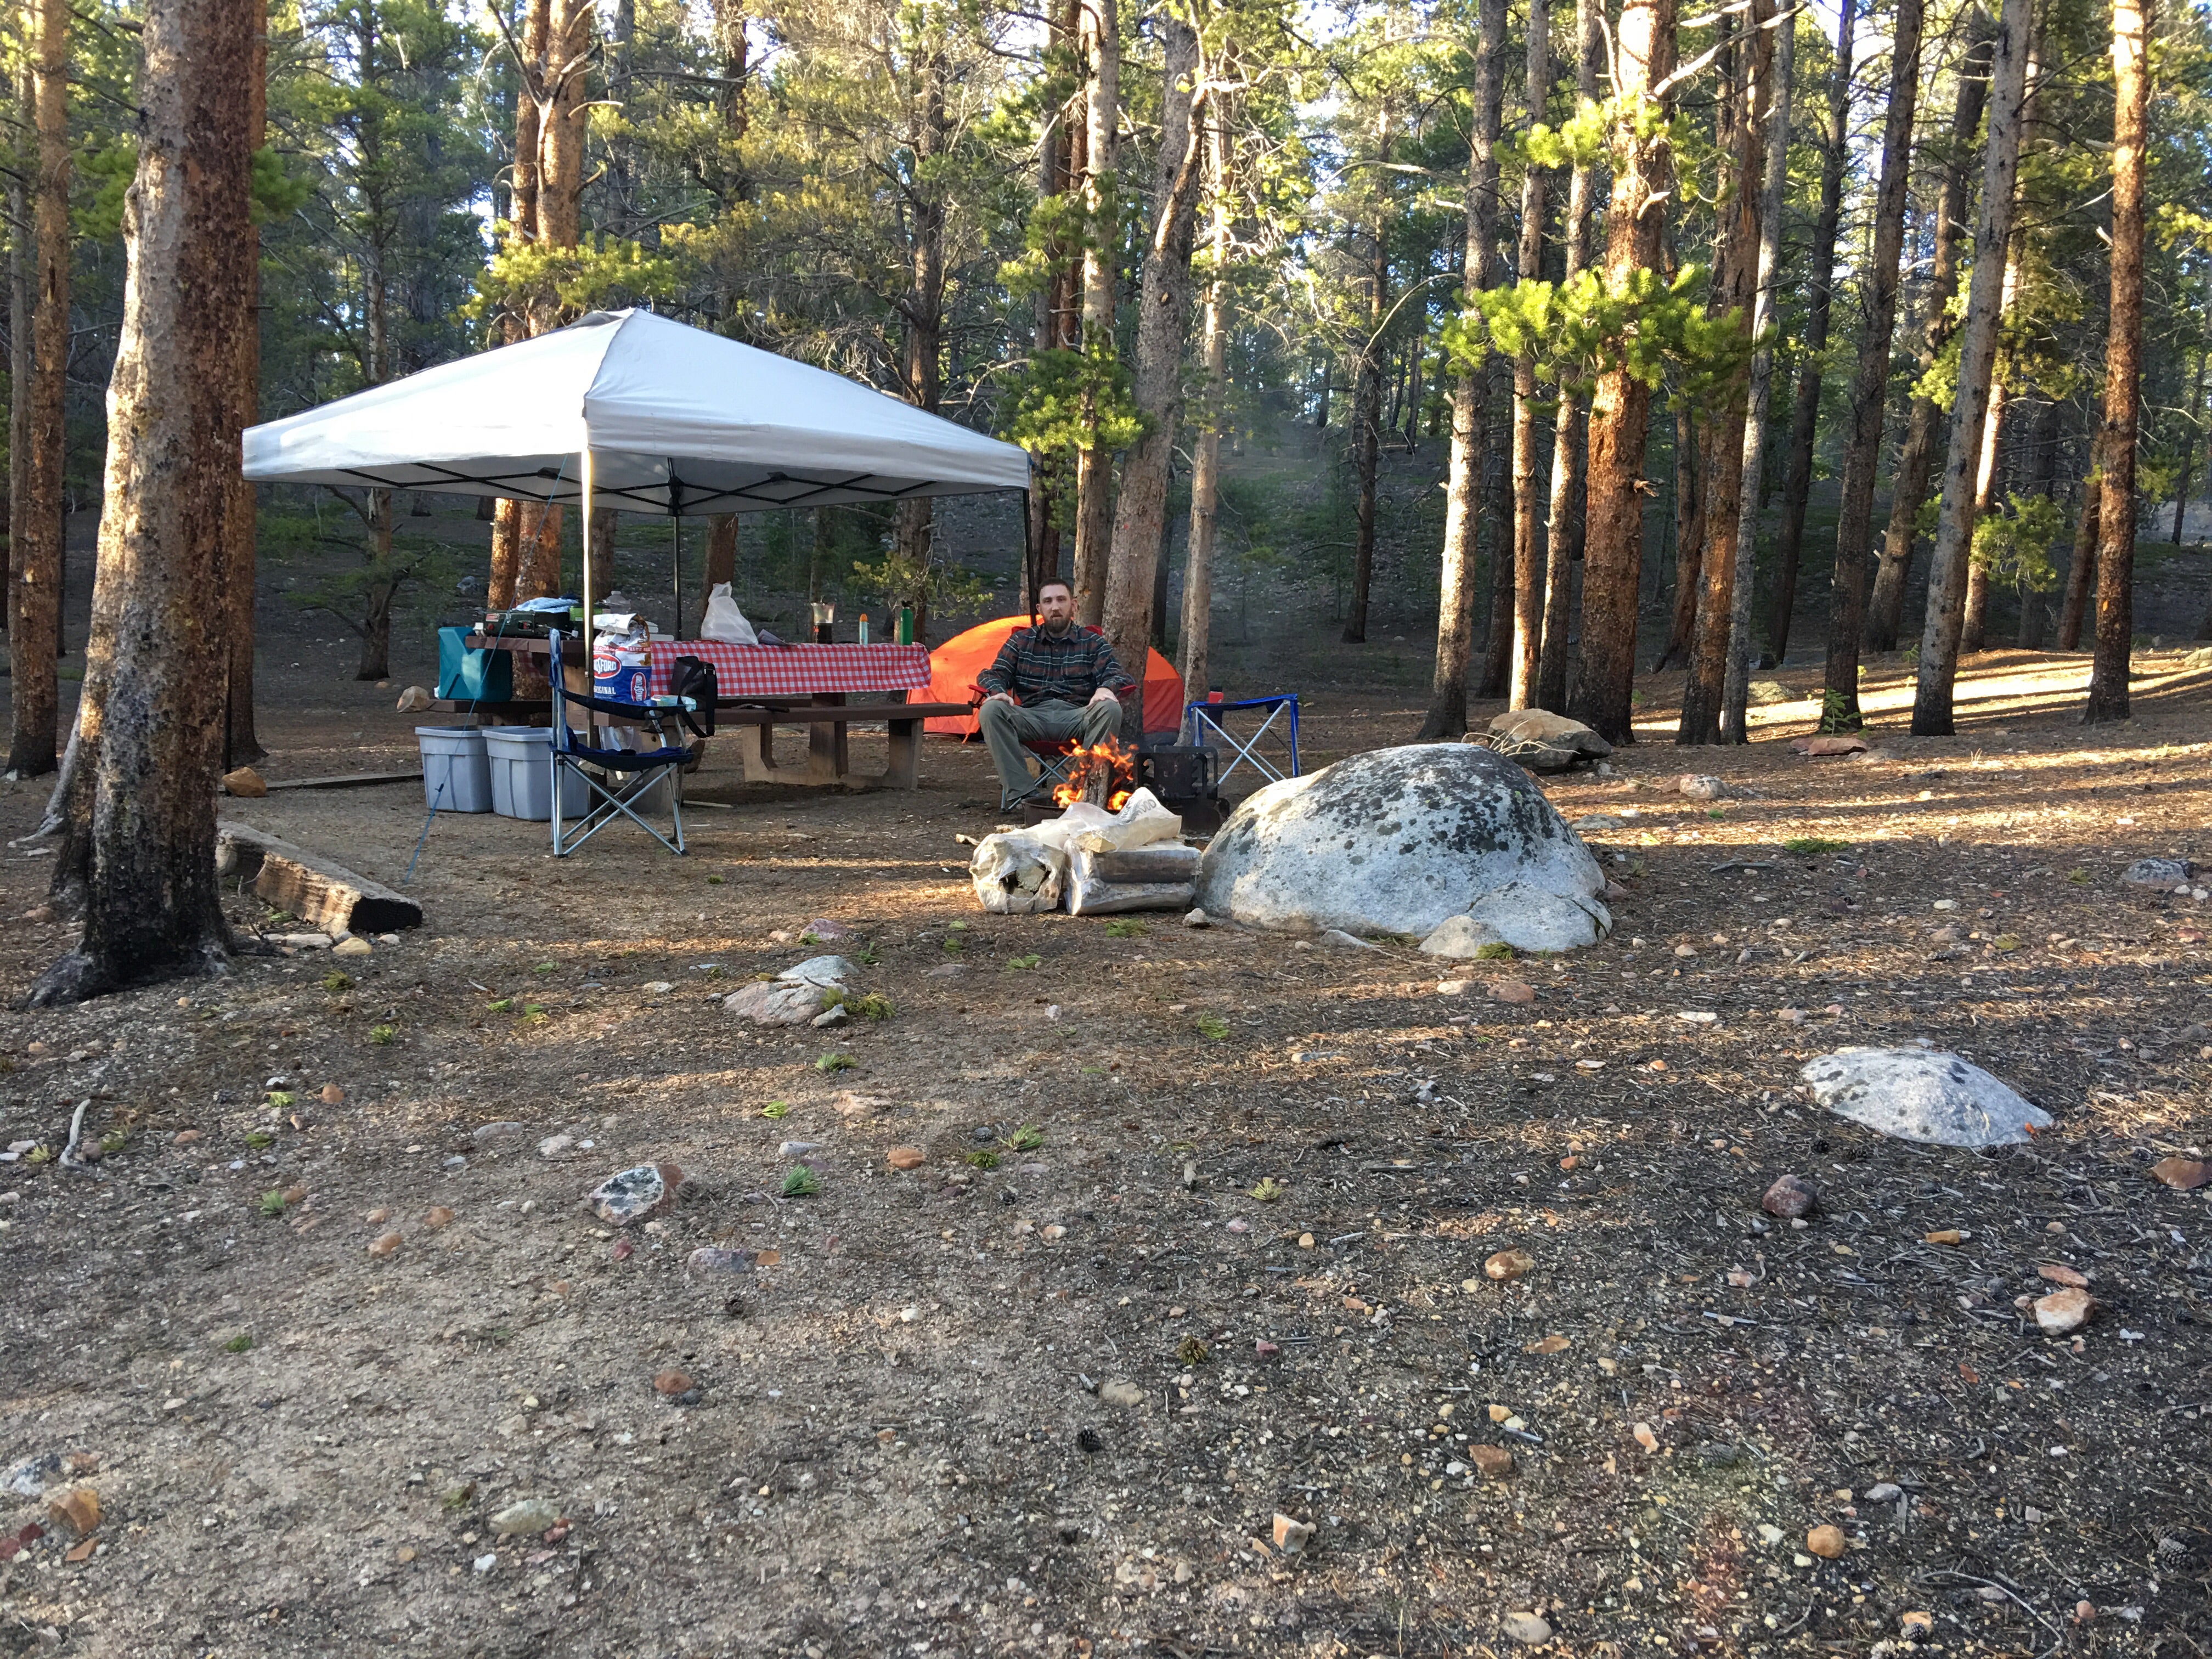 Picnic table and fire pit in great condition.  Tent at back of site with trees all around.  